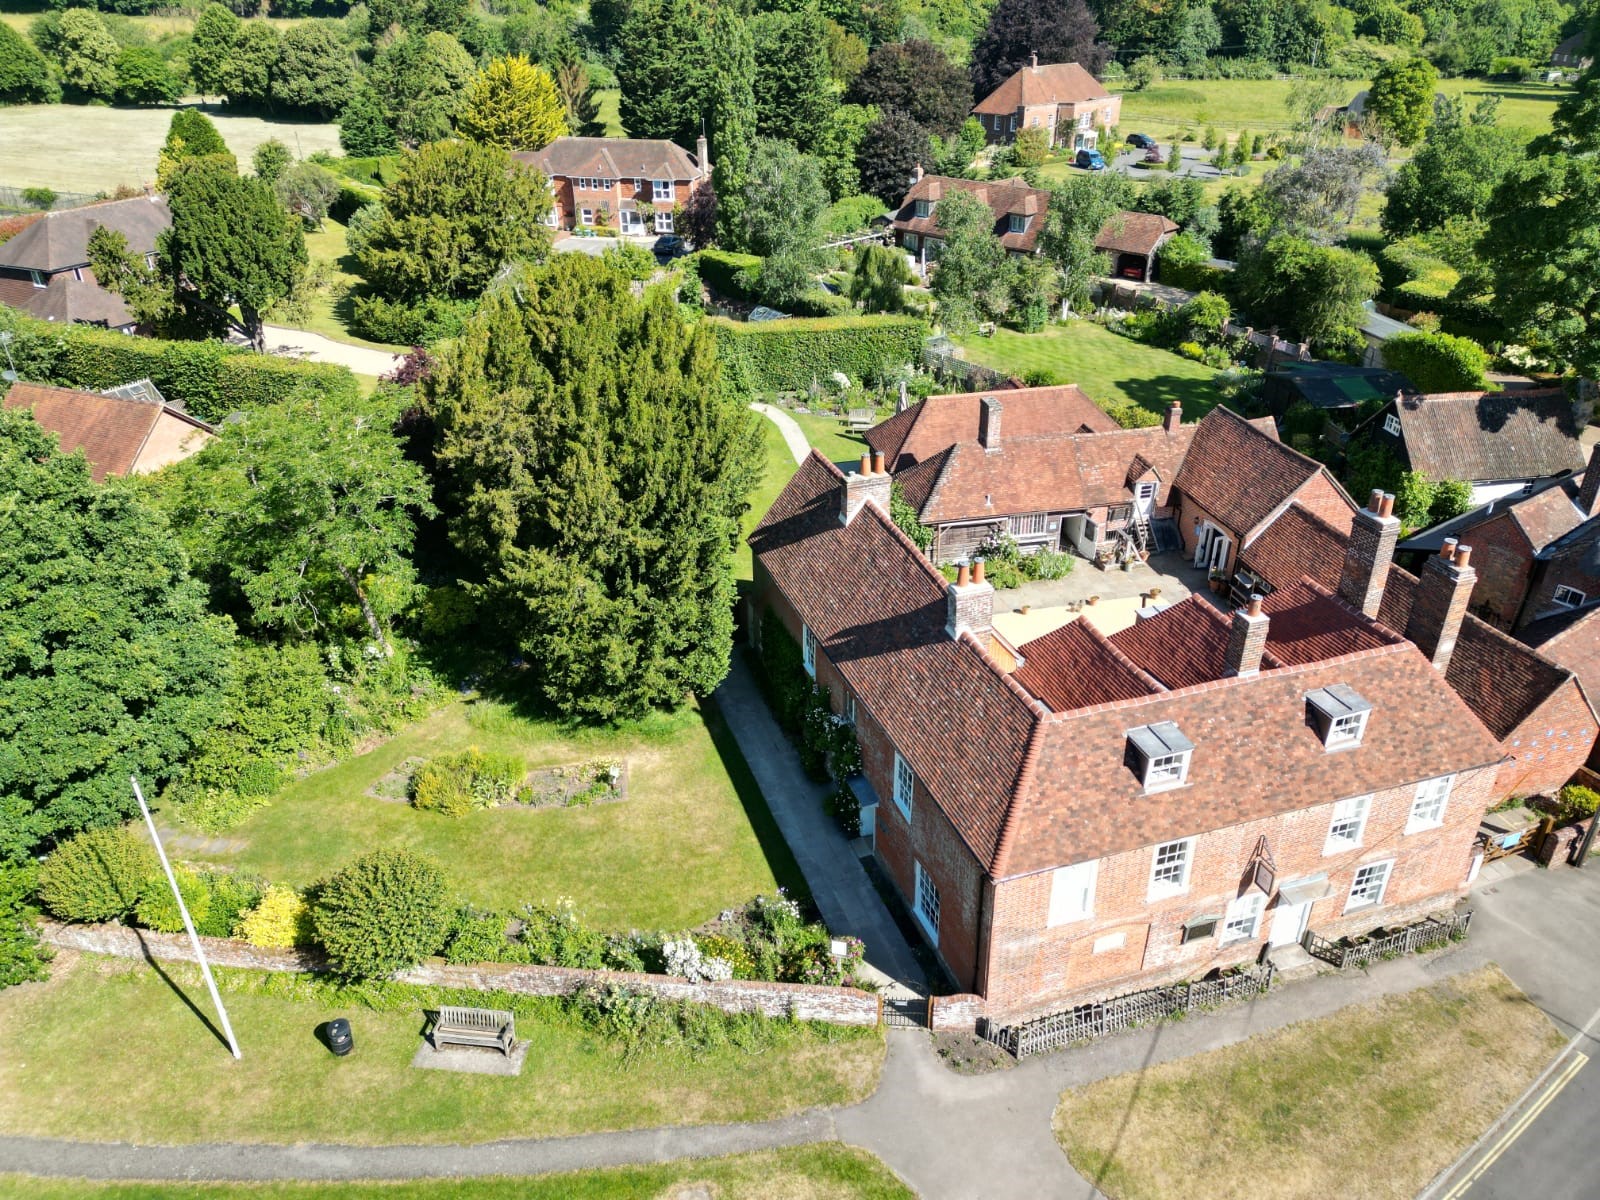 An aerial view of Jane Austen's House that shows the property in the context of it's location within trees